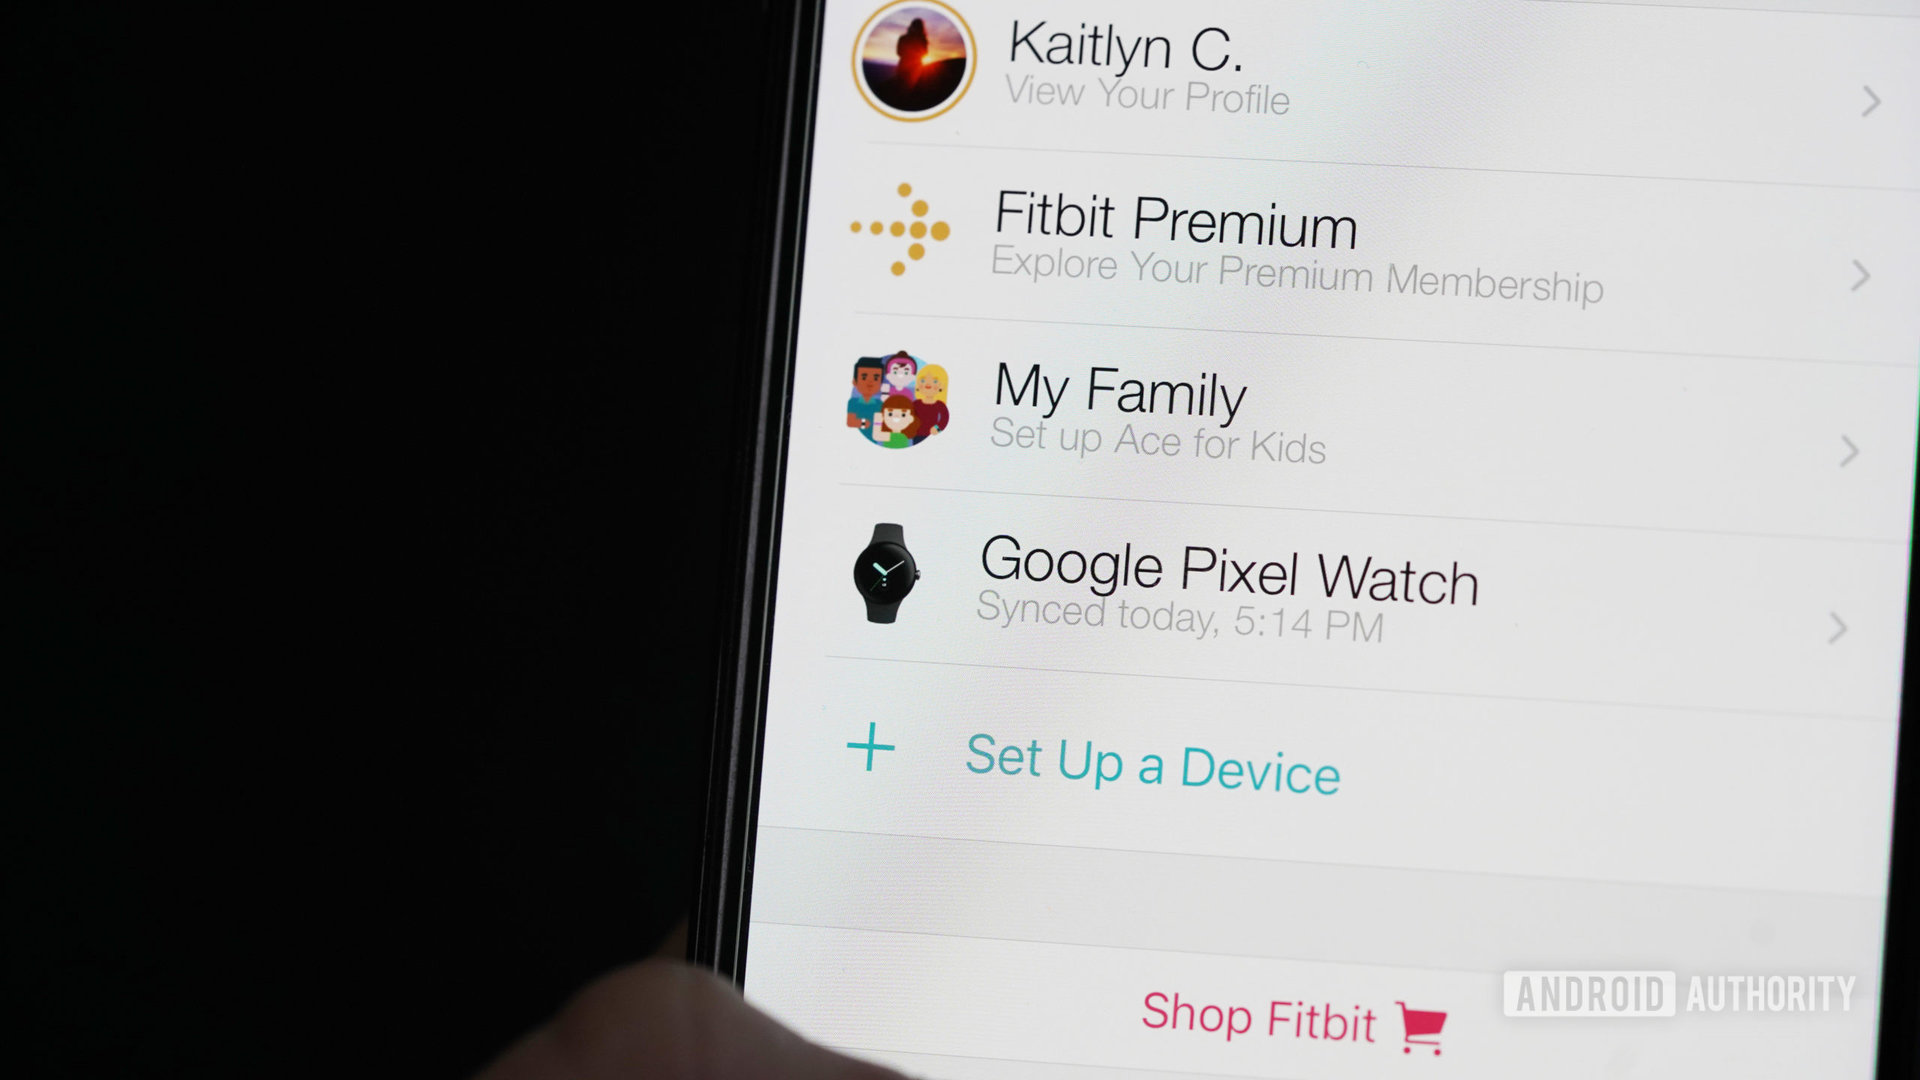 A Samsung Galaxy A51 displays a Fitbit user's Account screen.